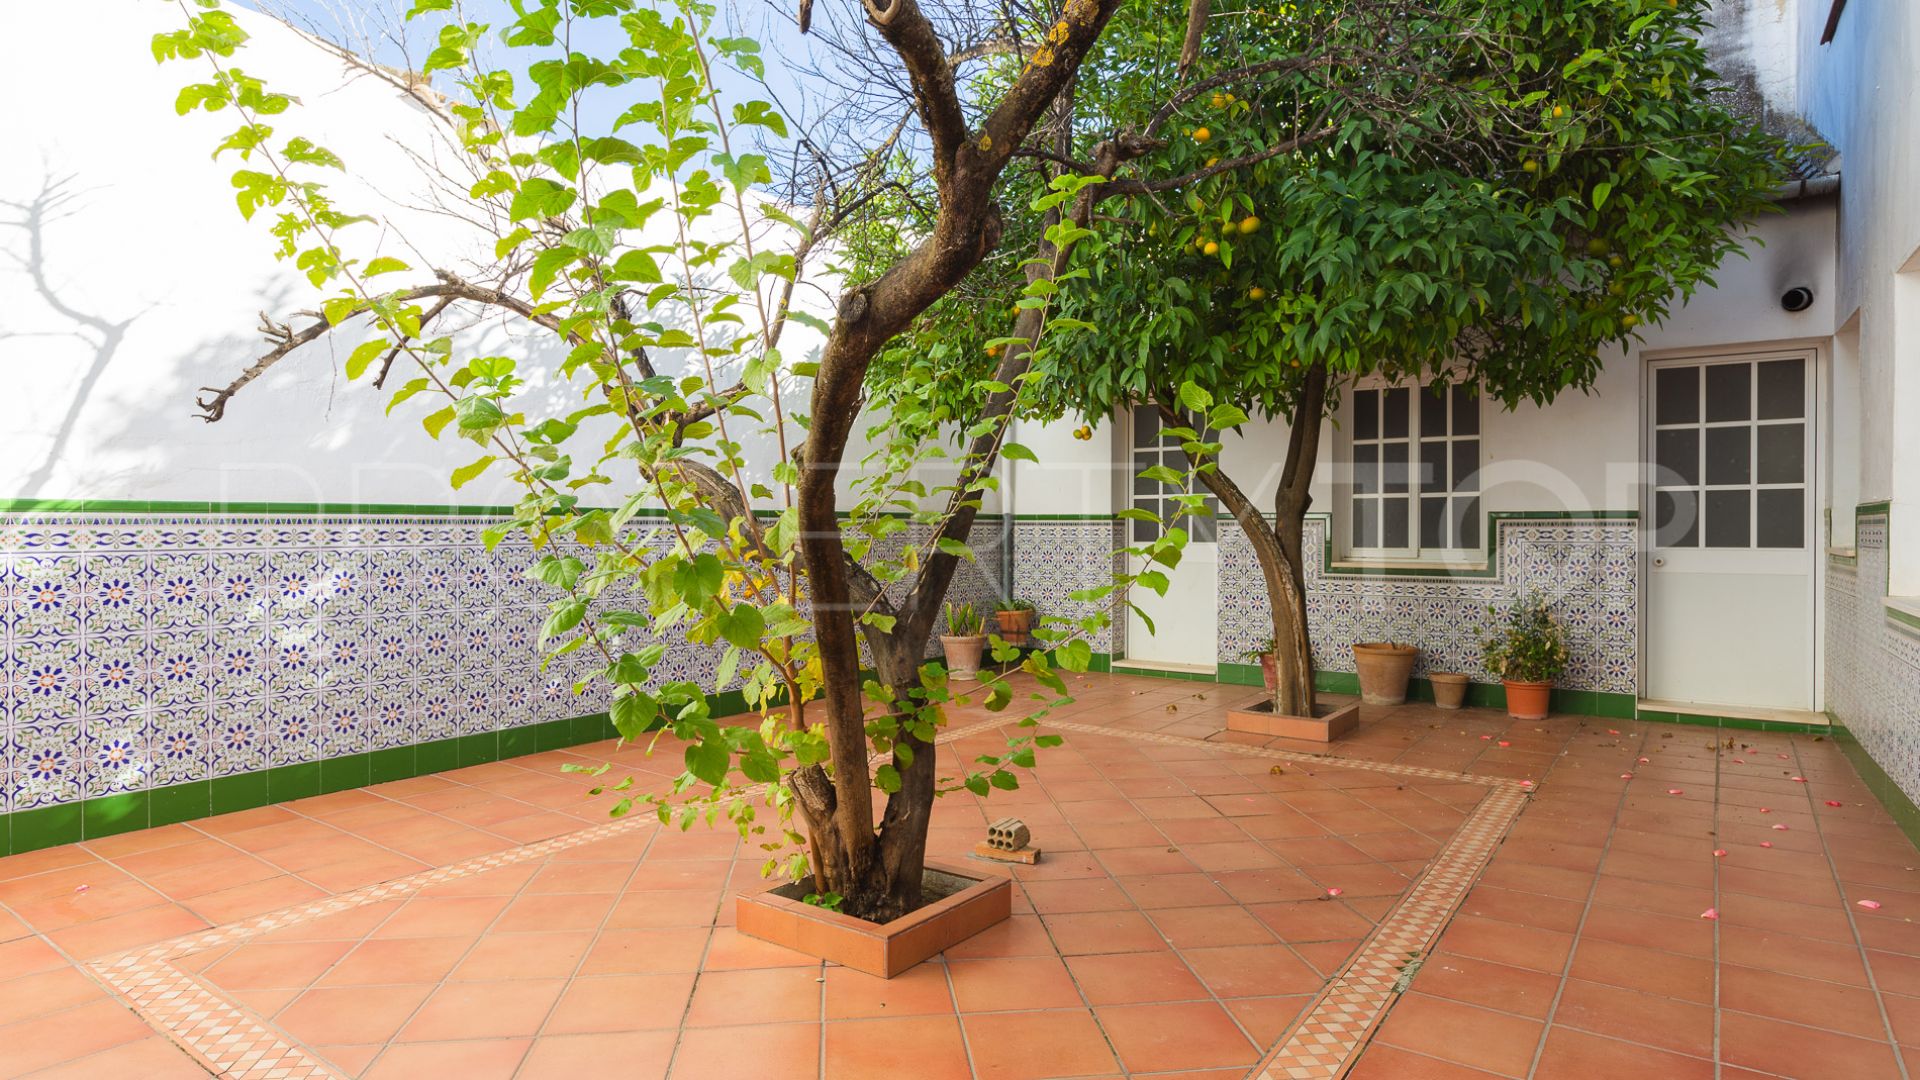 Ronda Centro 7 bedrooms town house for sale